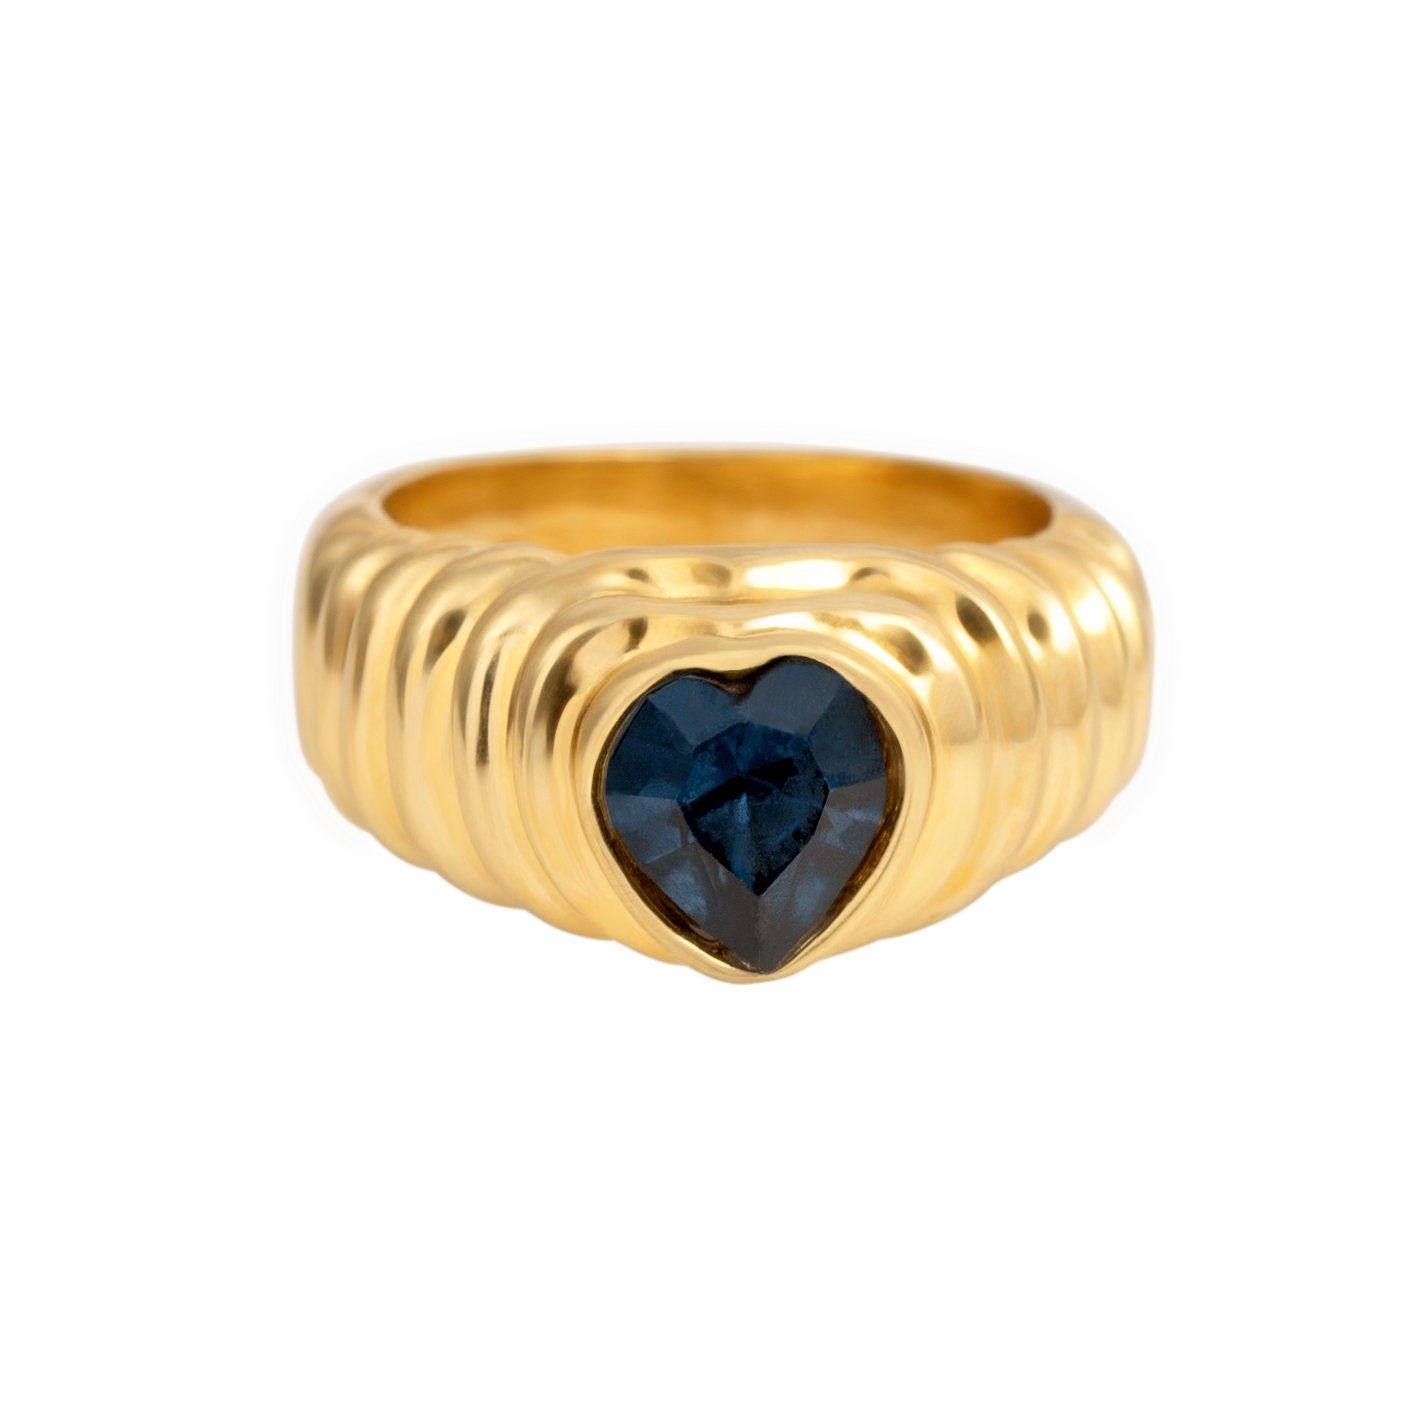 Vintage Ring Sapphire Swarovski Crystal Heart Ring 18k Gold Womans Handmade Antique Jewelry Hearts R2063 - Limited Stock - Never Worn